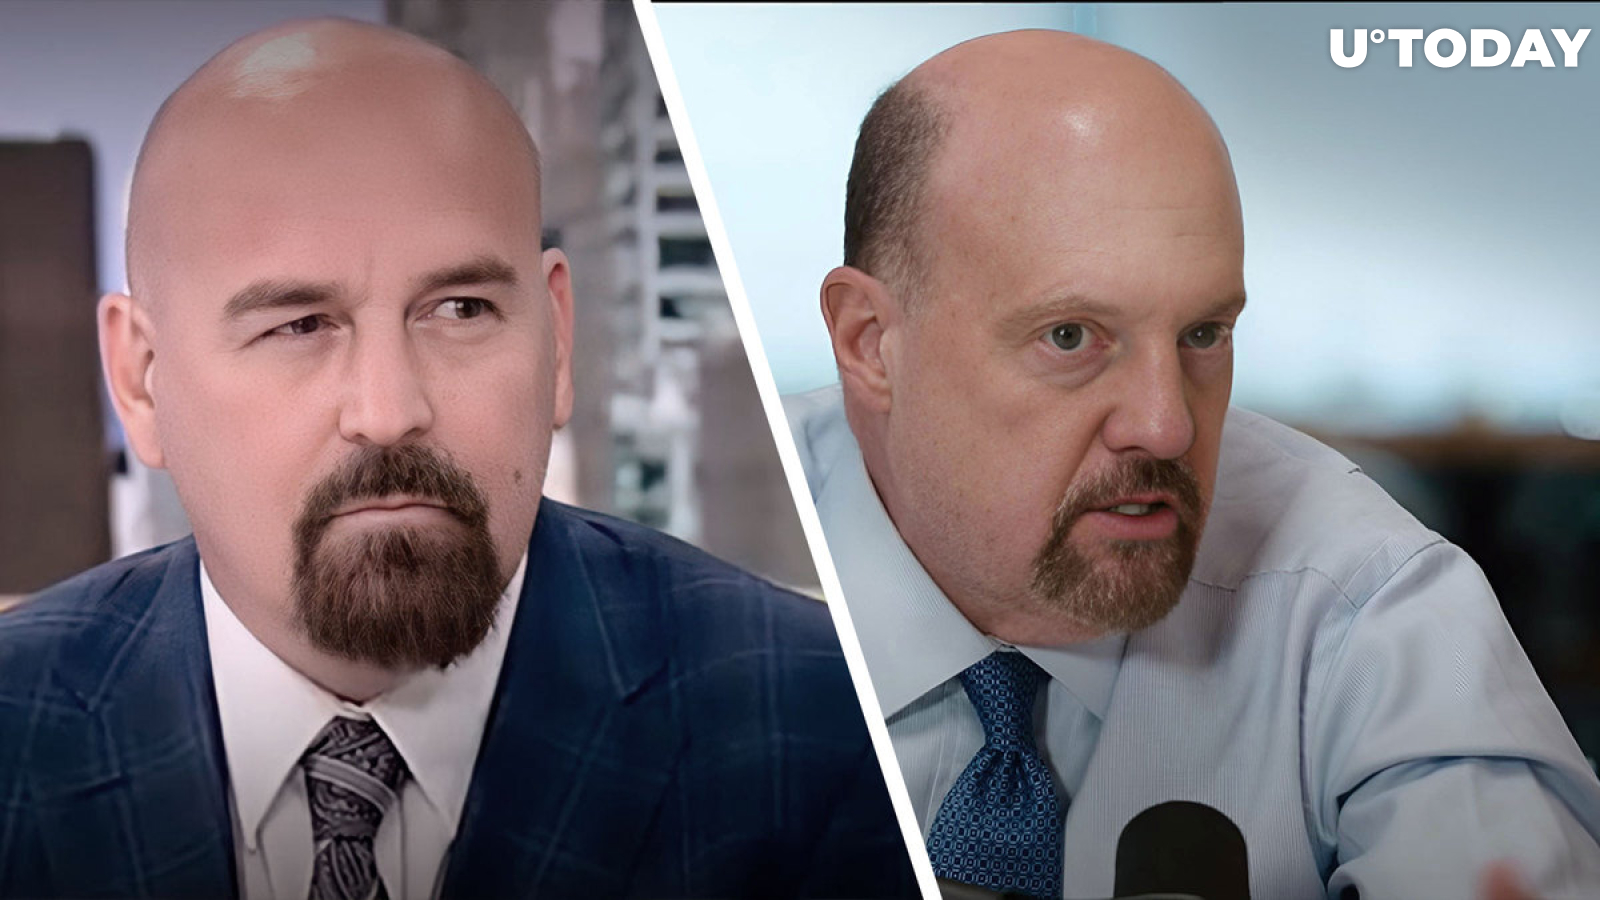 Pro-Crypto Attorney John Deaton Believes XRP Is Better off With Jim Cramer as Critic, Here's Why